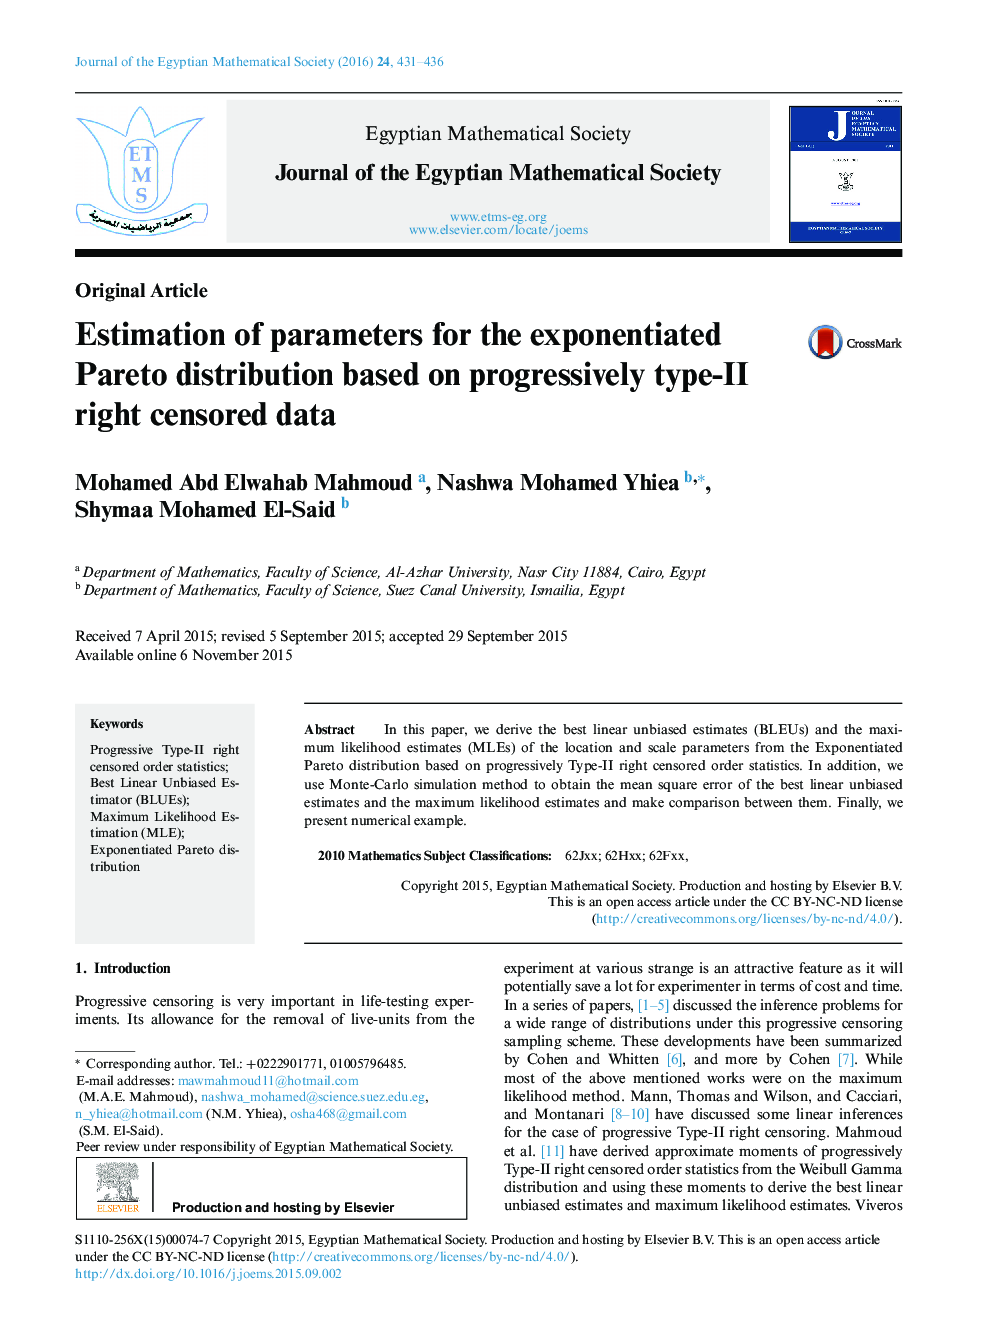 Estimation of parameters for the exponentiated Pareto distribution based on progressively type-II right censored data